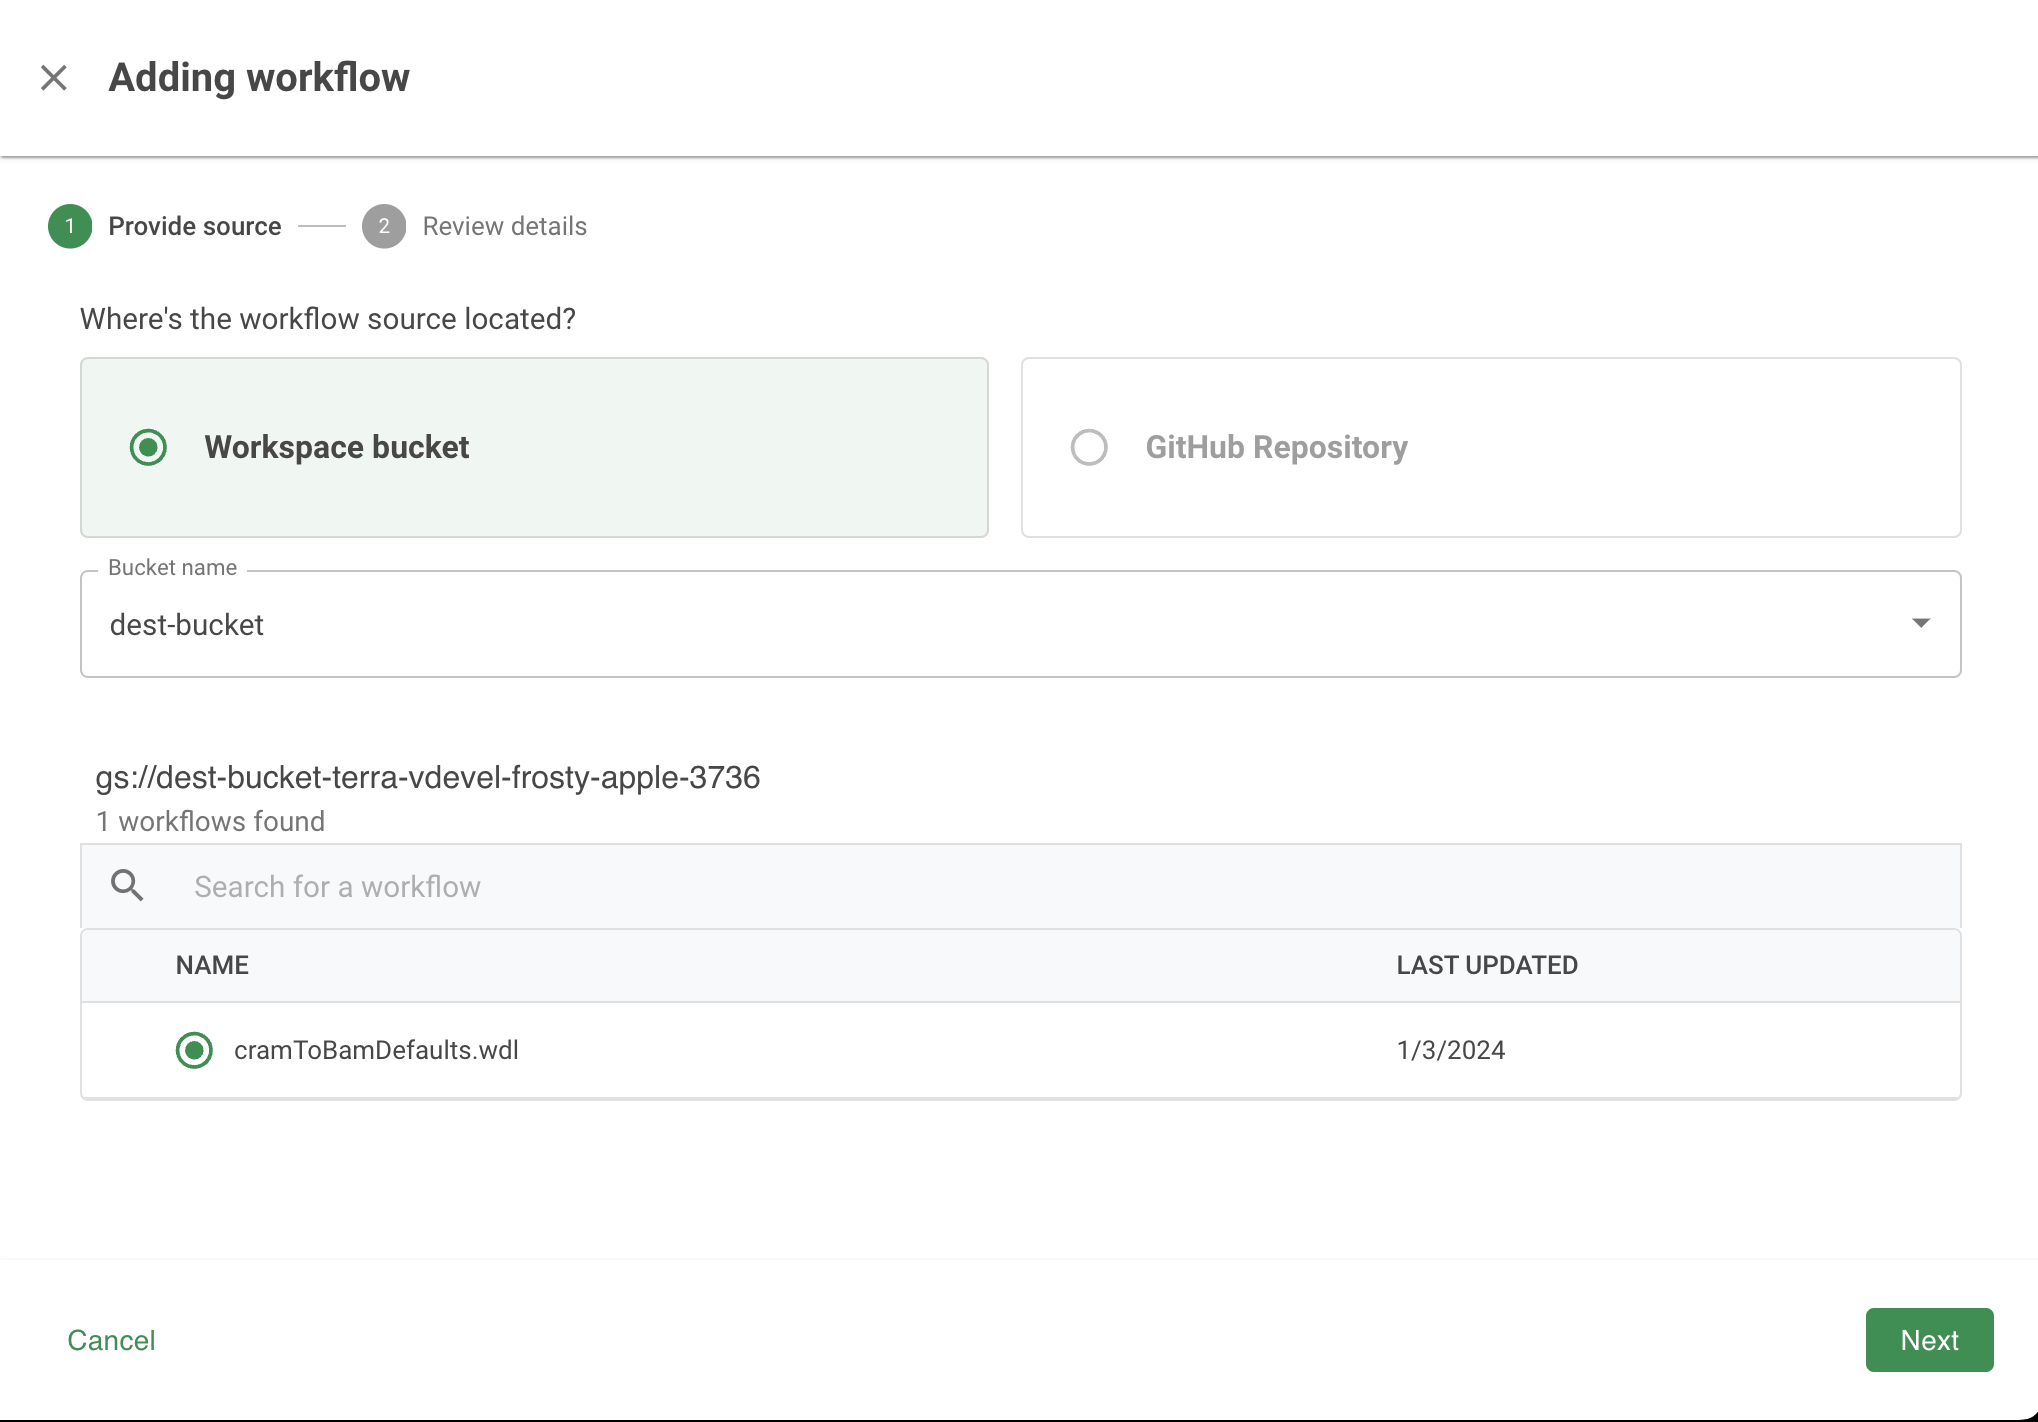 Screenshot of the Provide source dialog, the first step when adding a new workflow.